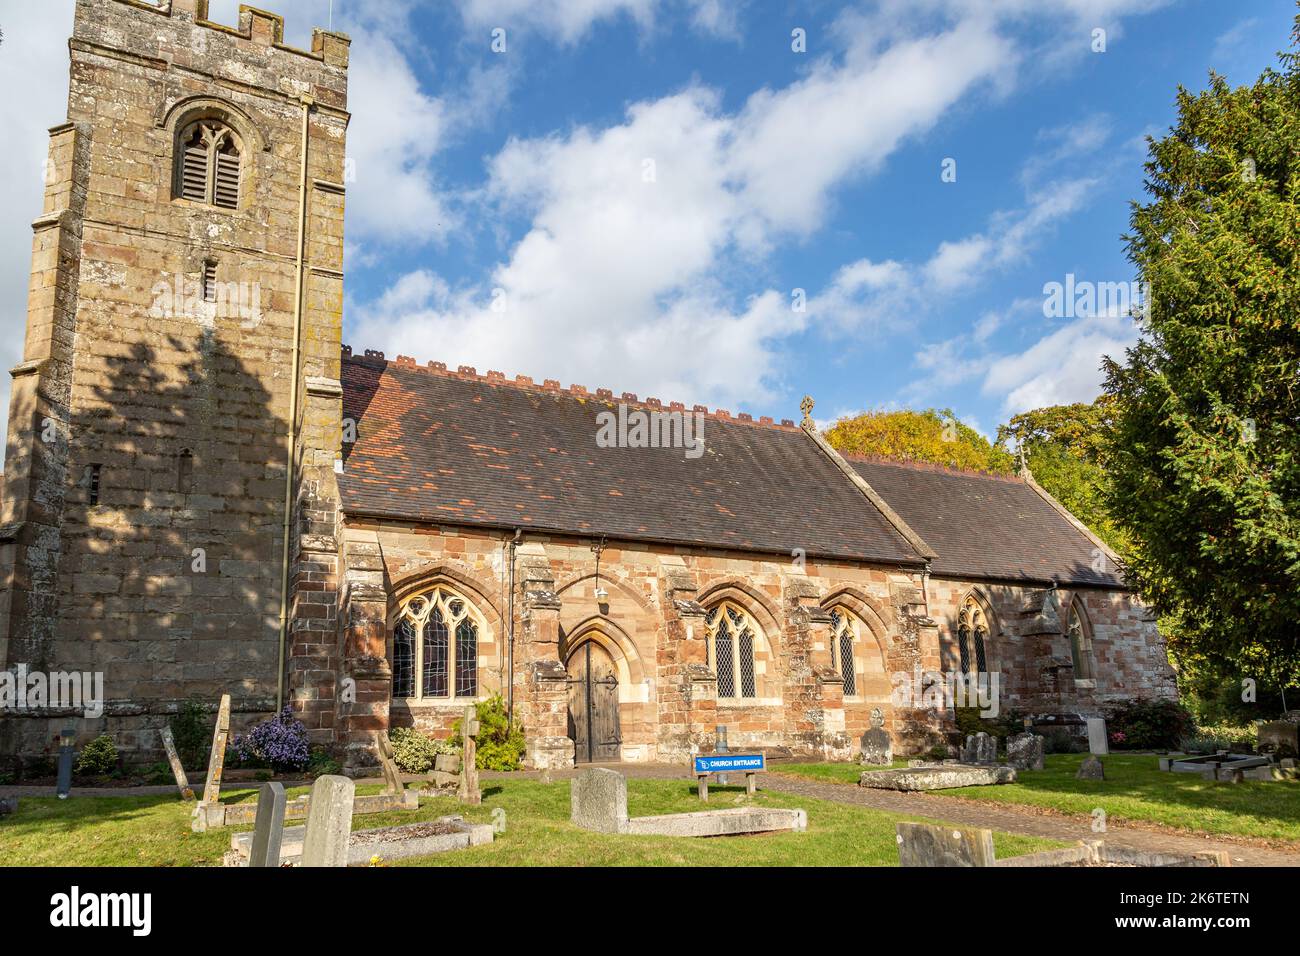 St. Peter's Church on Ipsley Church Lane, Redditch, on a sunny autumn day with blue sky. Stock Photo